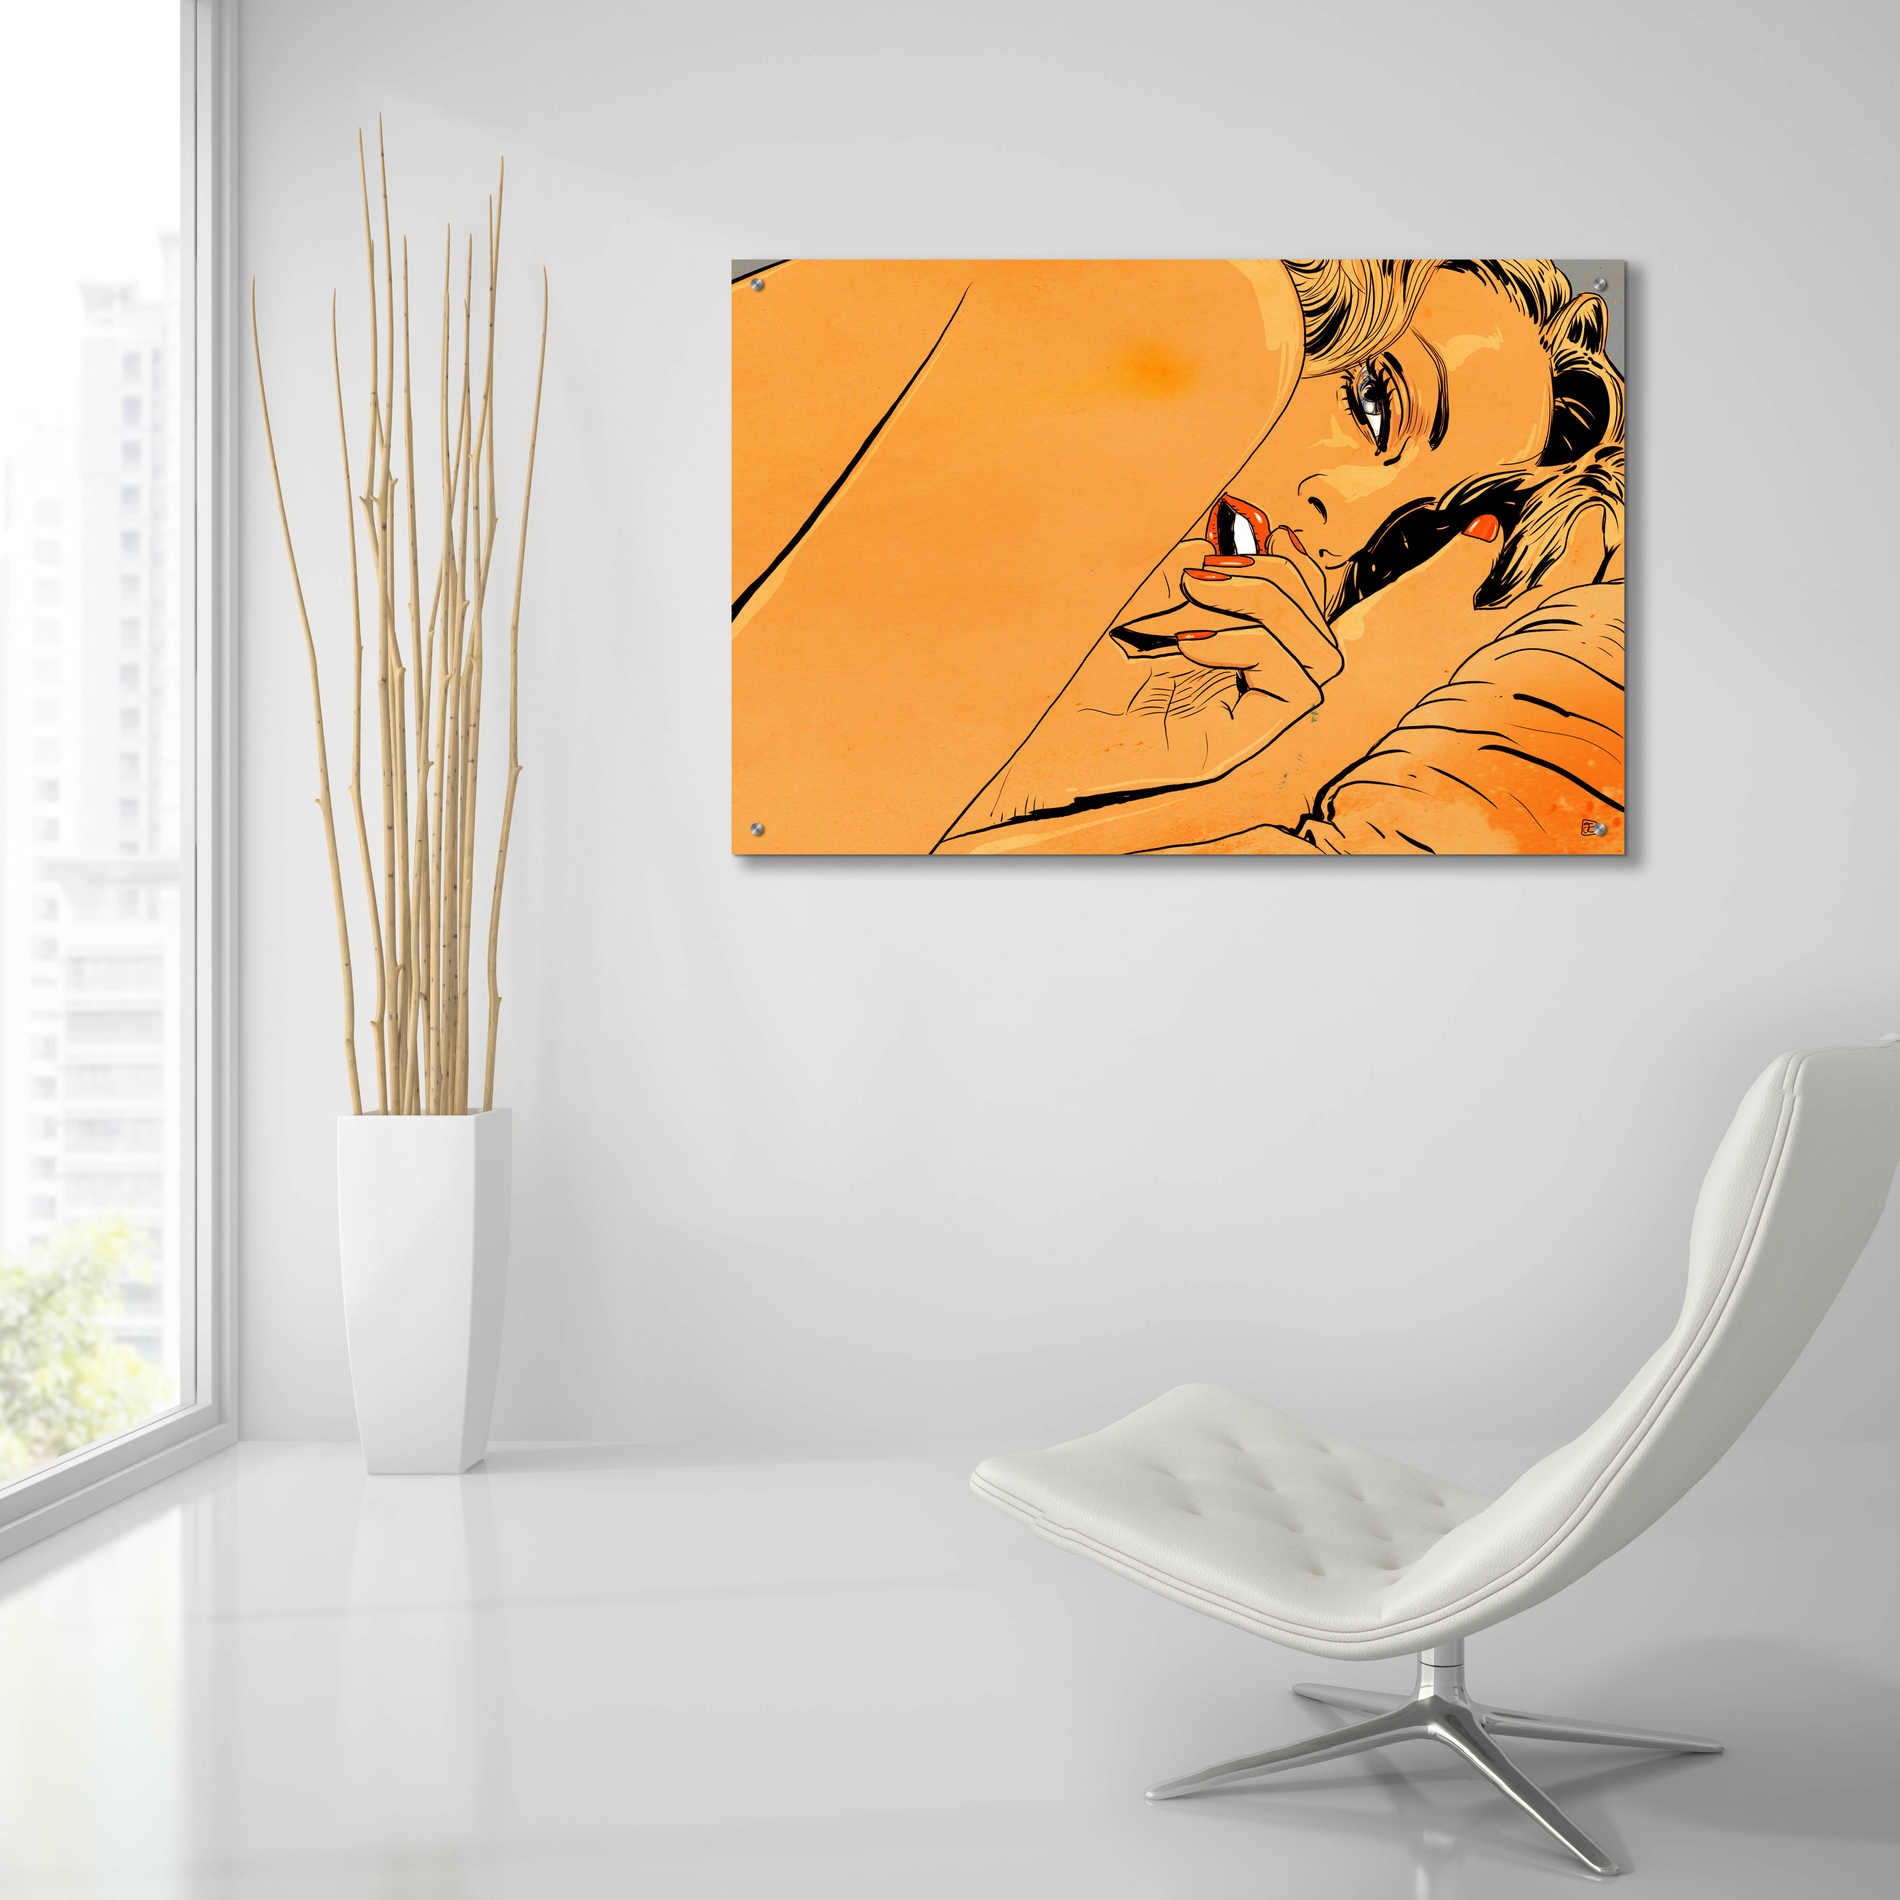 Epic Art 'Girl in bed 1' by Giuseppe Cristiano, Acrylic Glass Wall Art,36x24